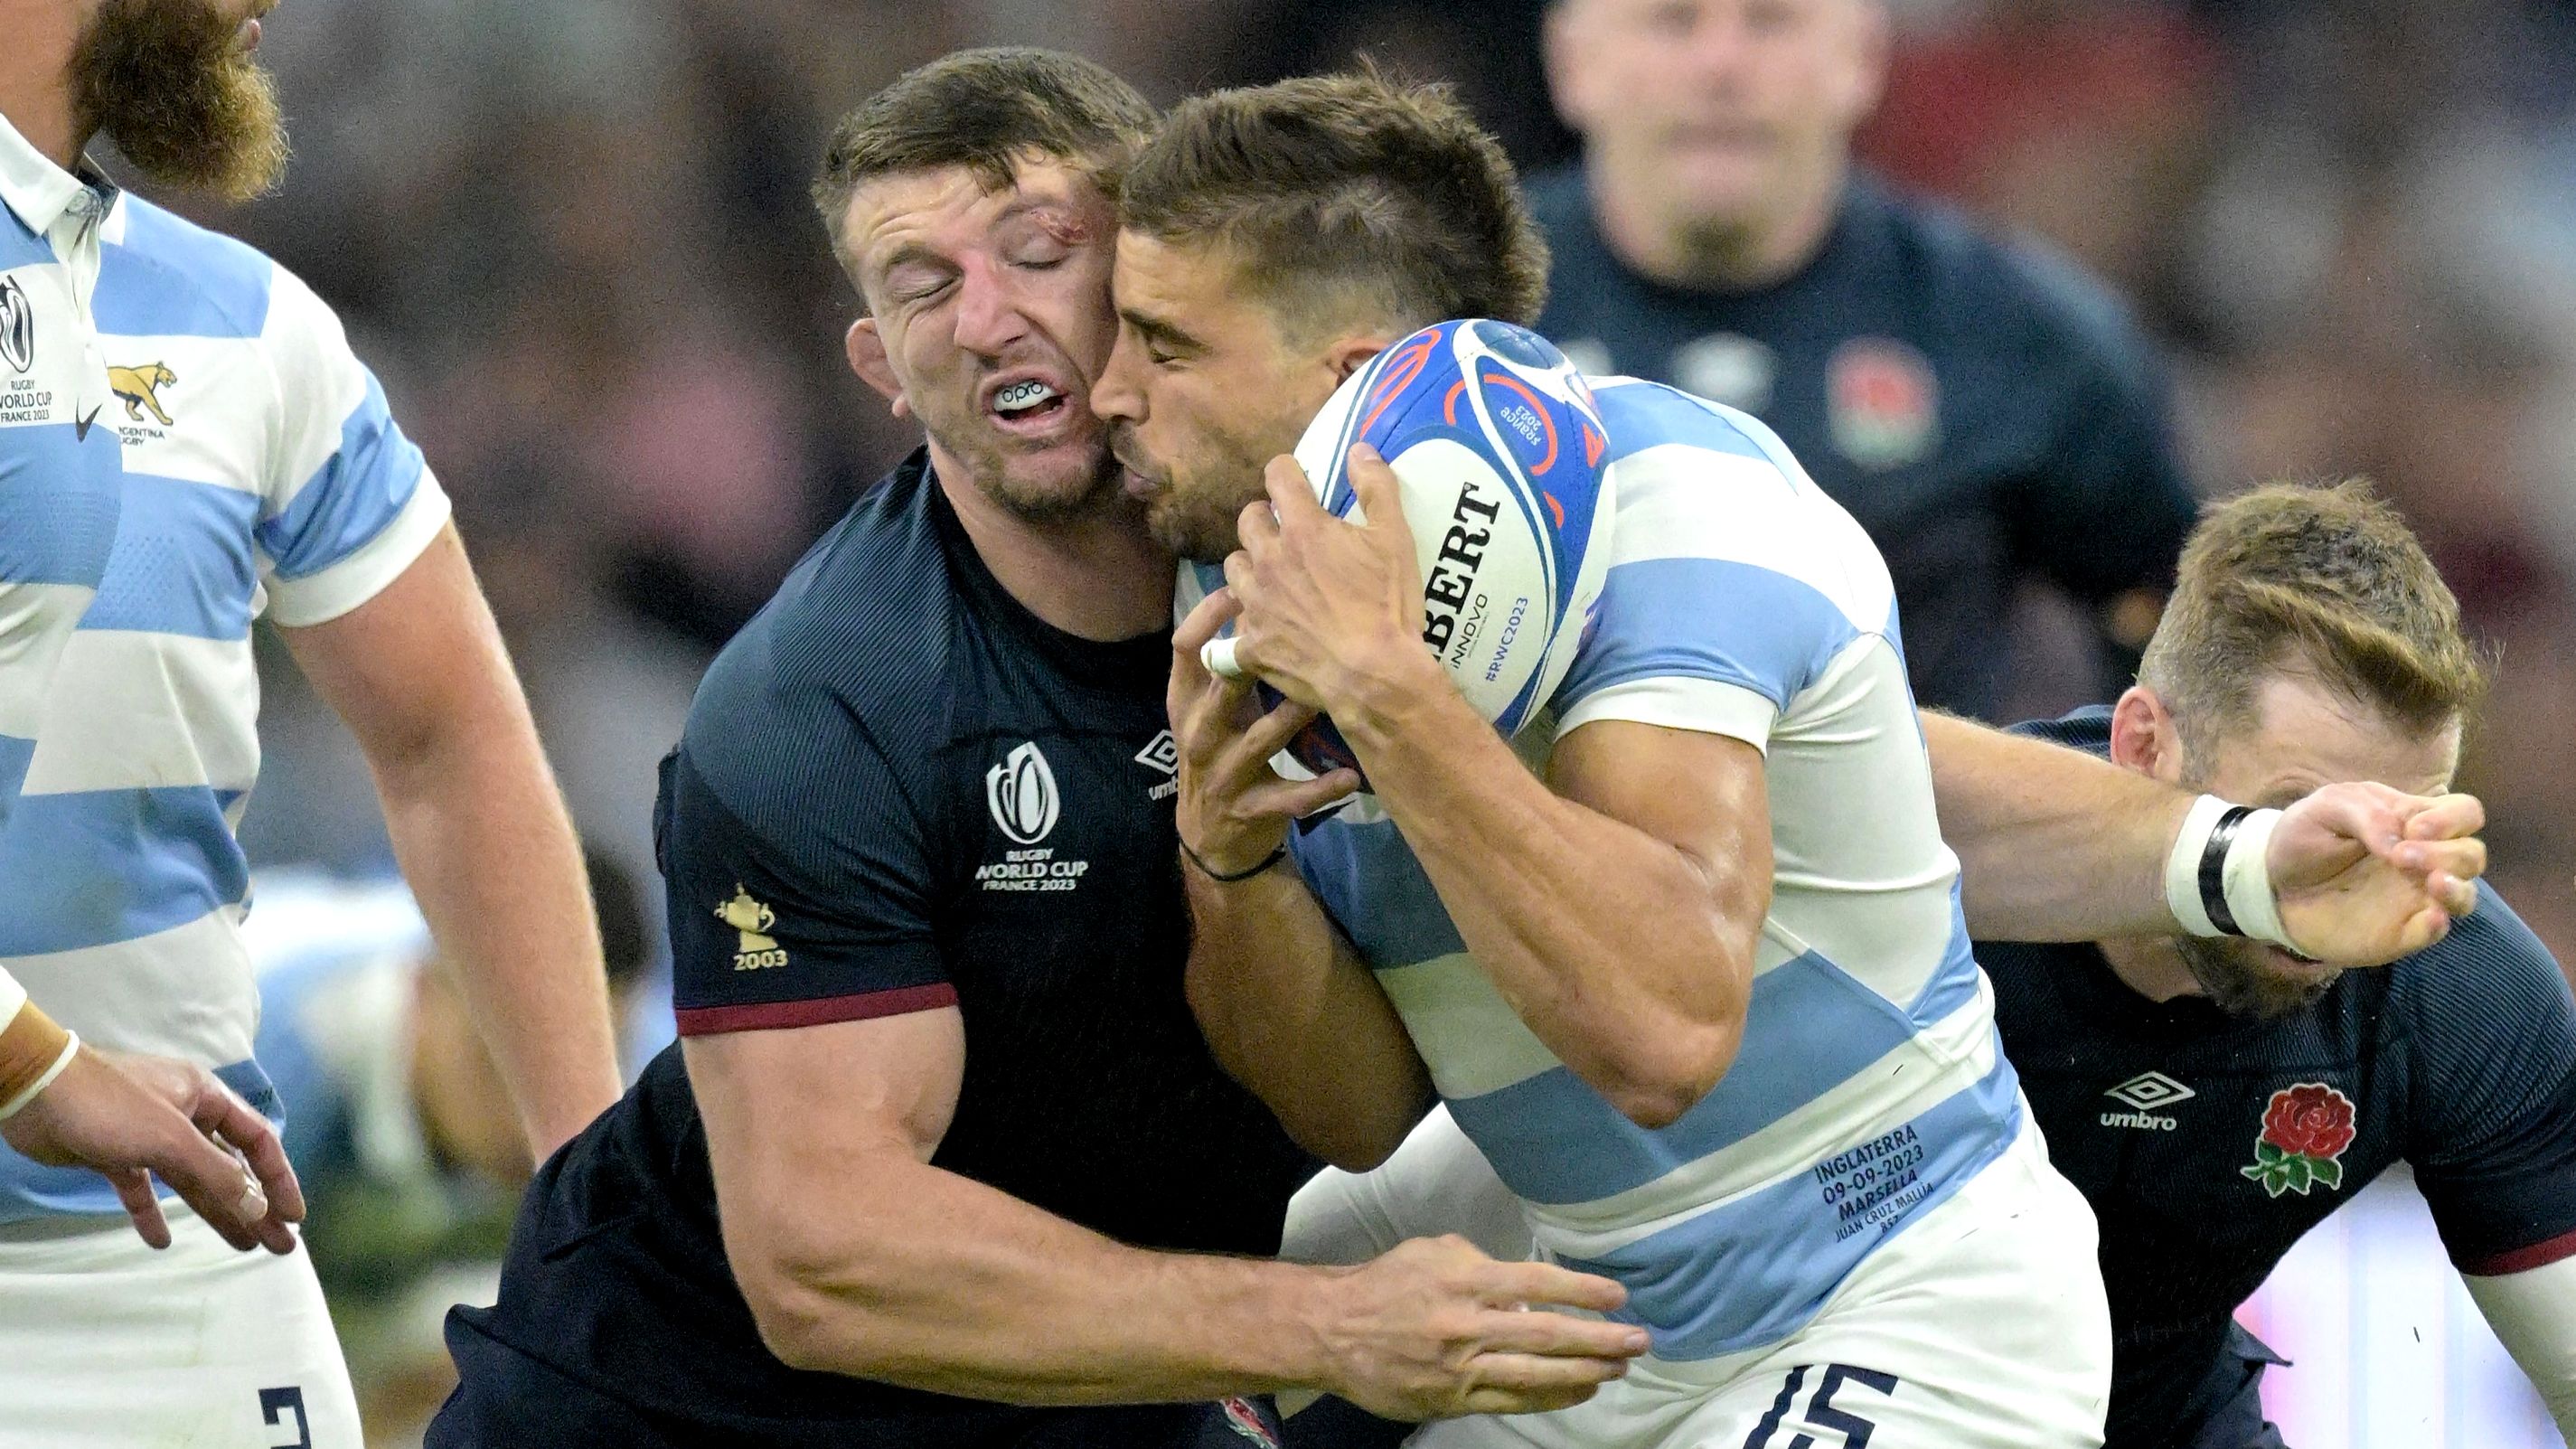 Tom Curry of England makes a dangerous tackle on Juan Cruz Mallia of Argentina, for which he received a yellow card that was upgraded to red.